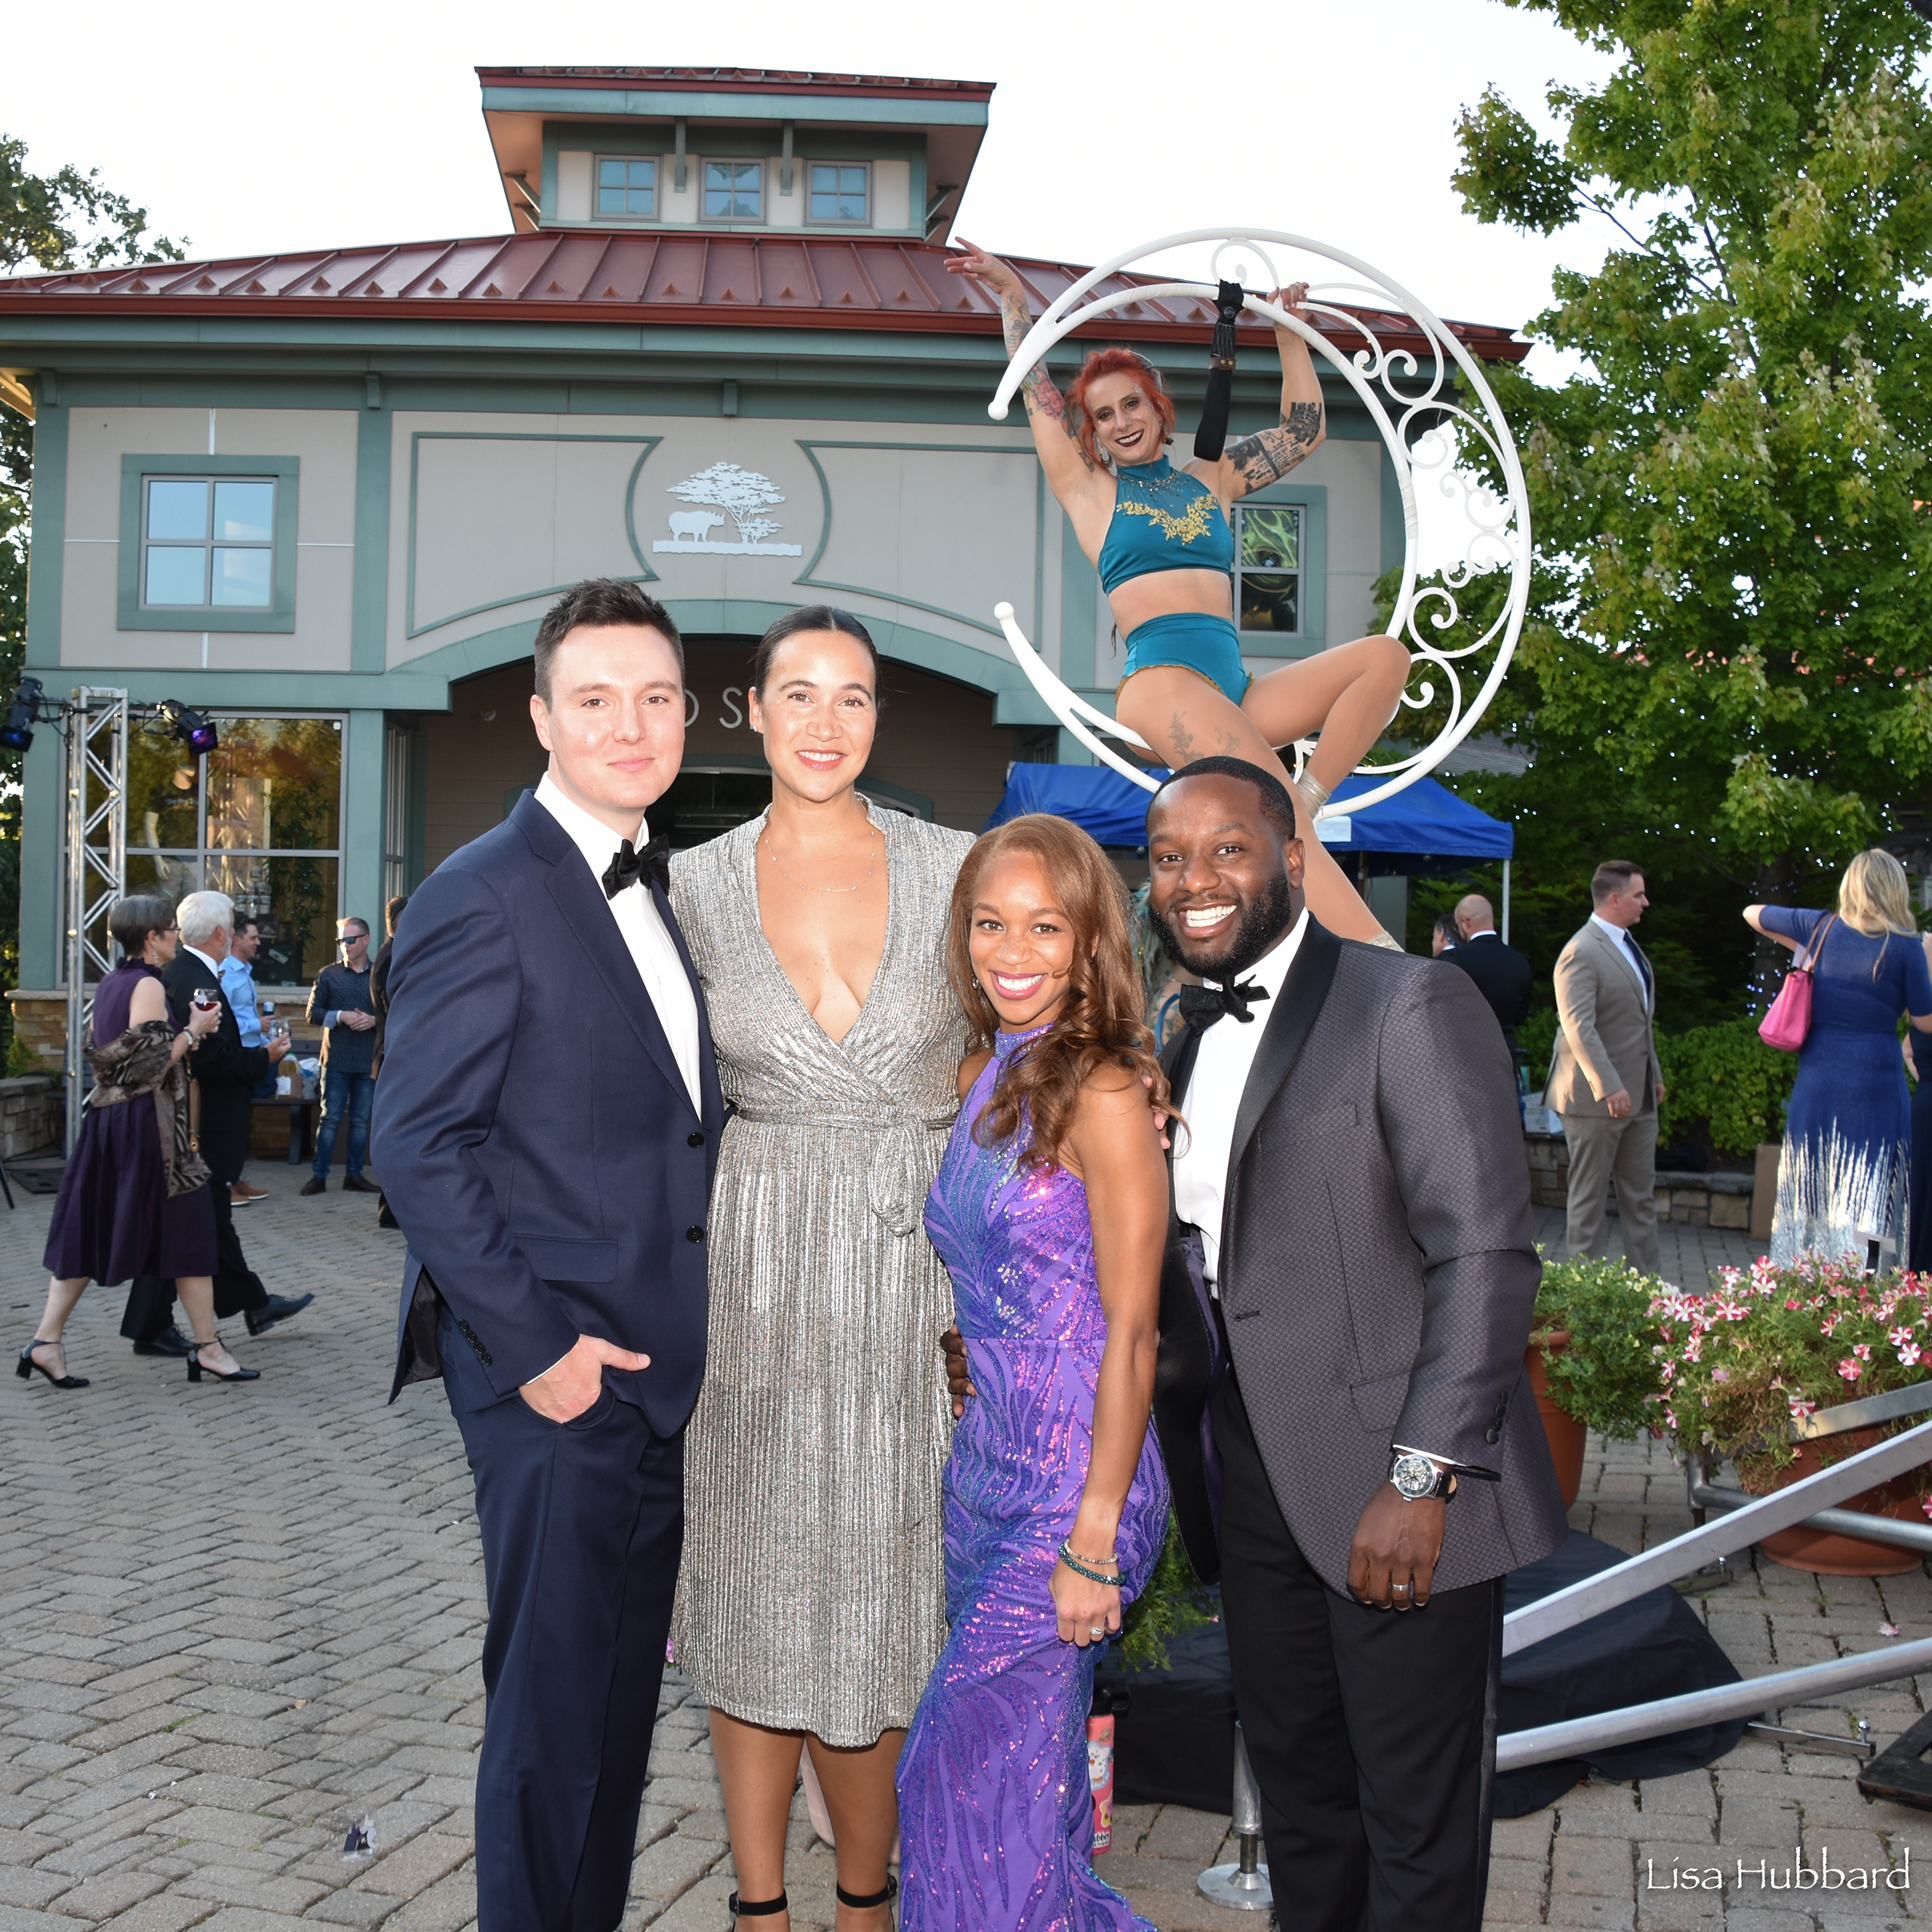 group of 4 people in formal attire posing for a picture in front of a acrobat woman sittin in a moon shaped lollipop stand